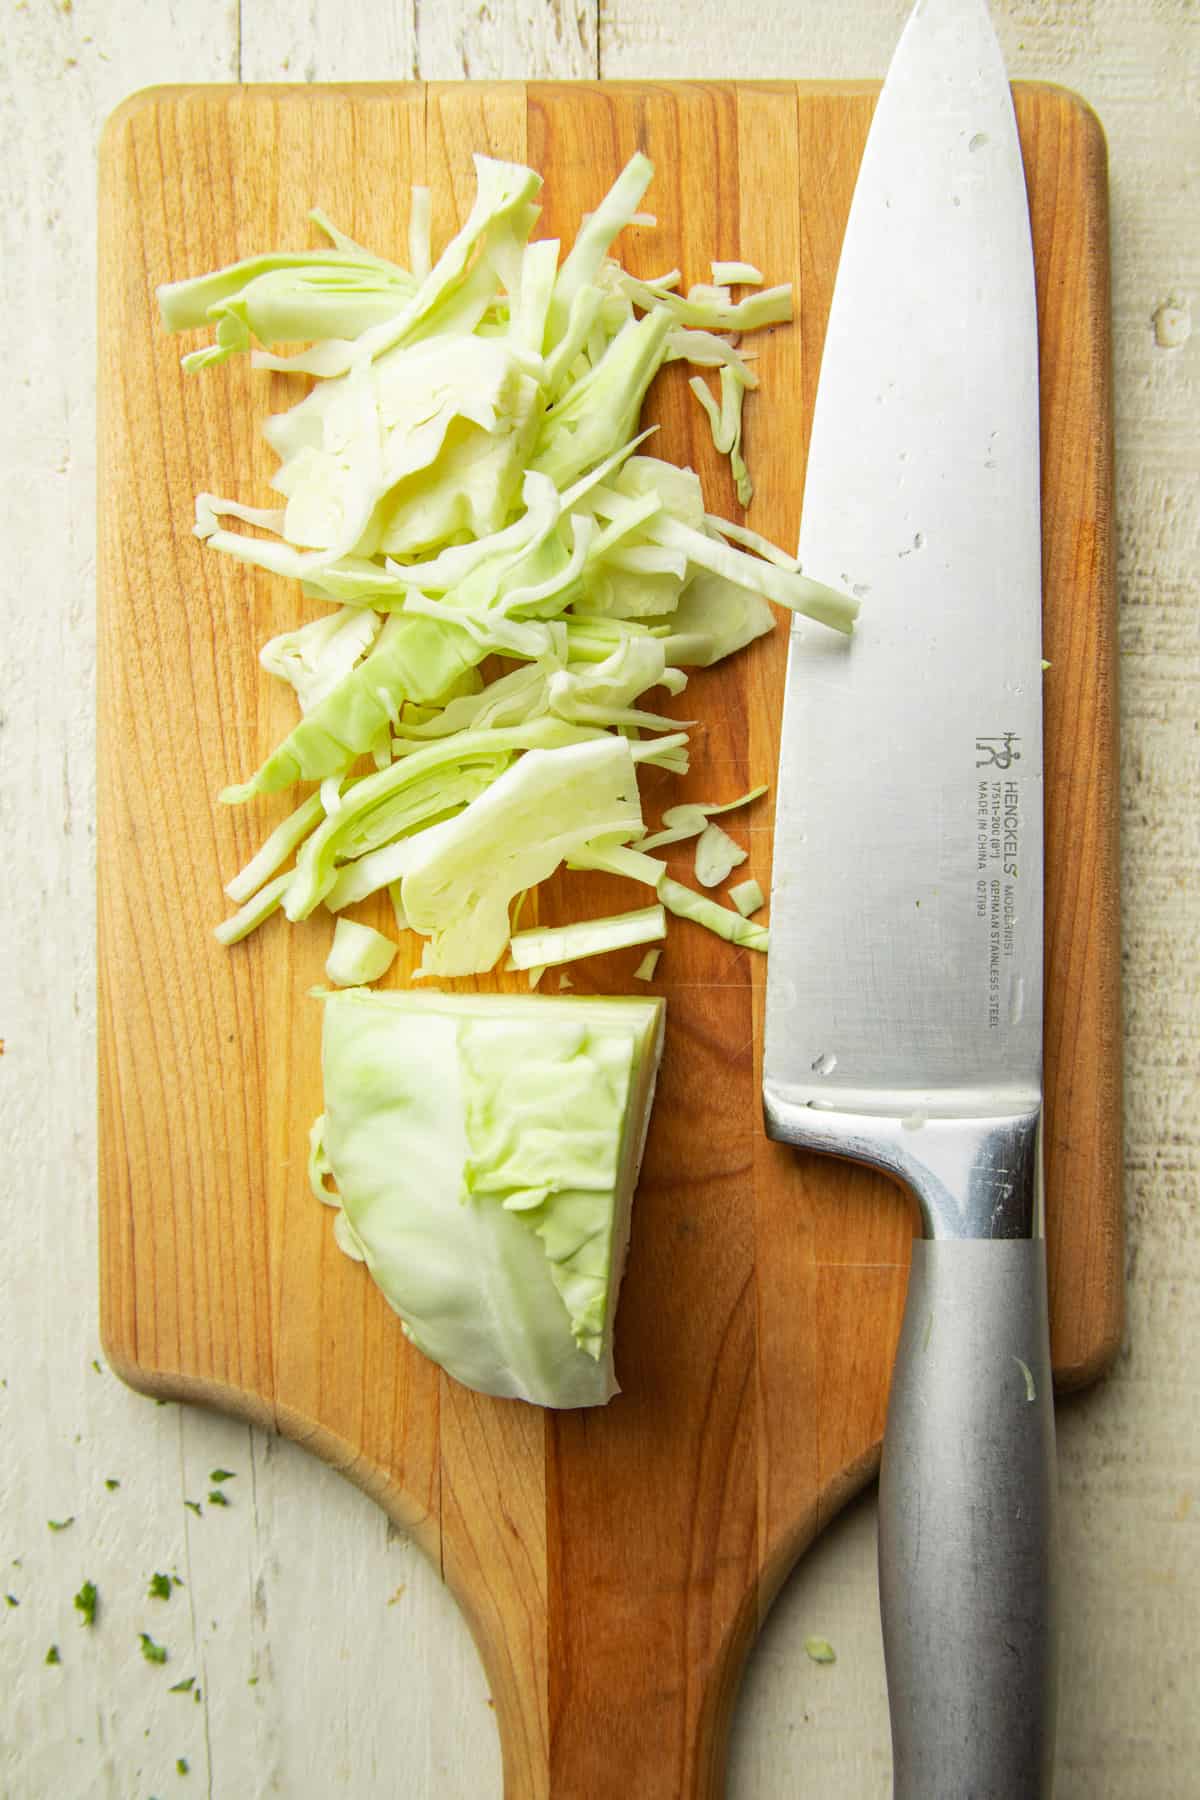 Partially shredded chunk of cabbage on a cutting board with knife.